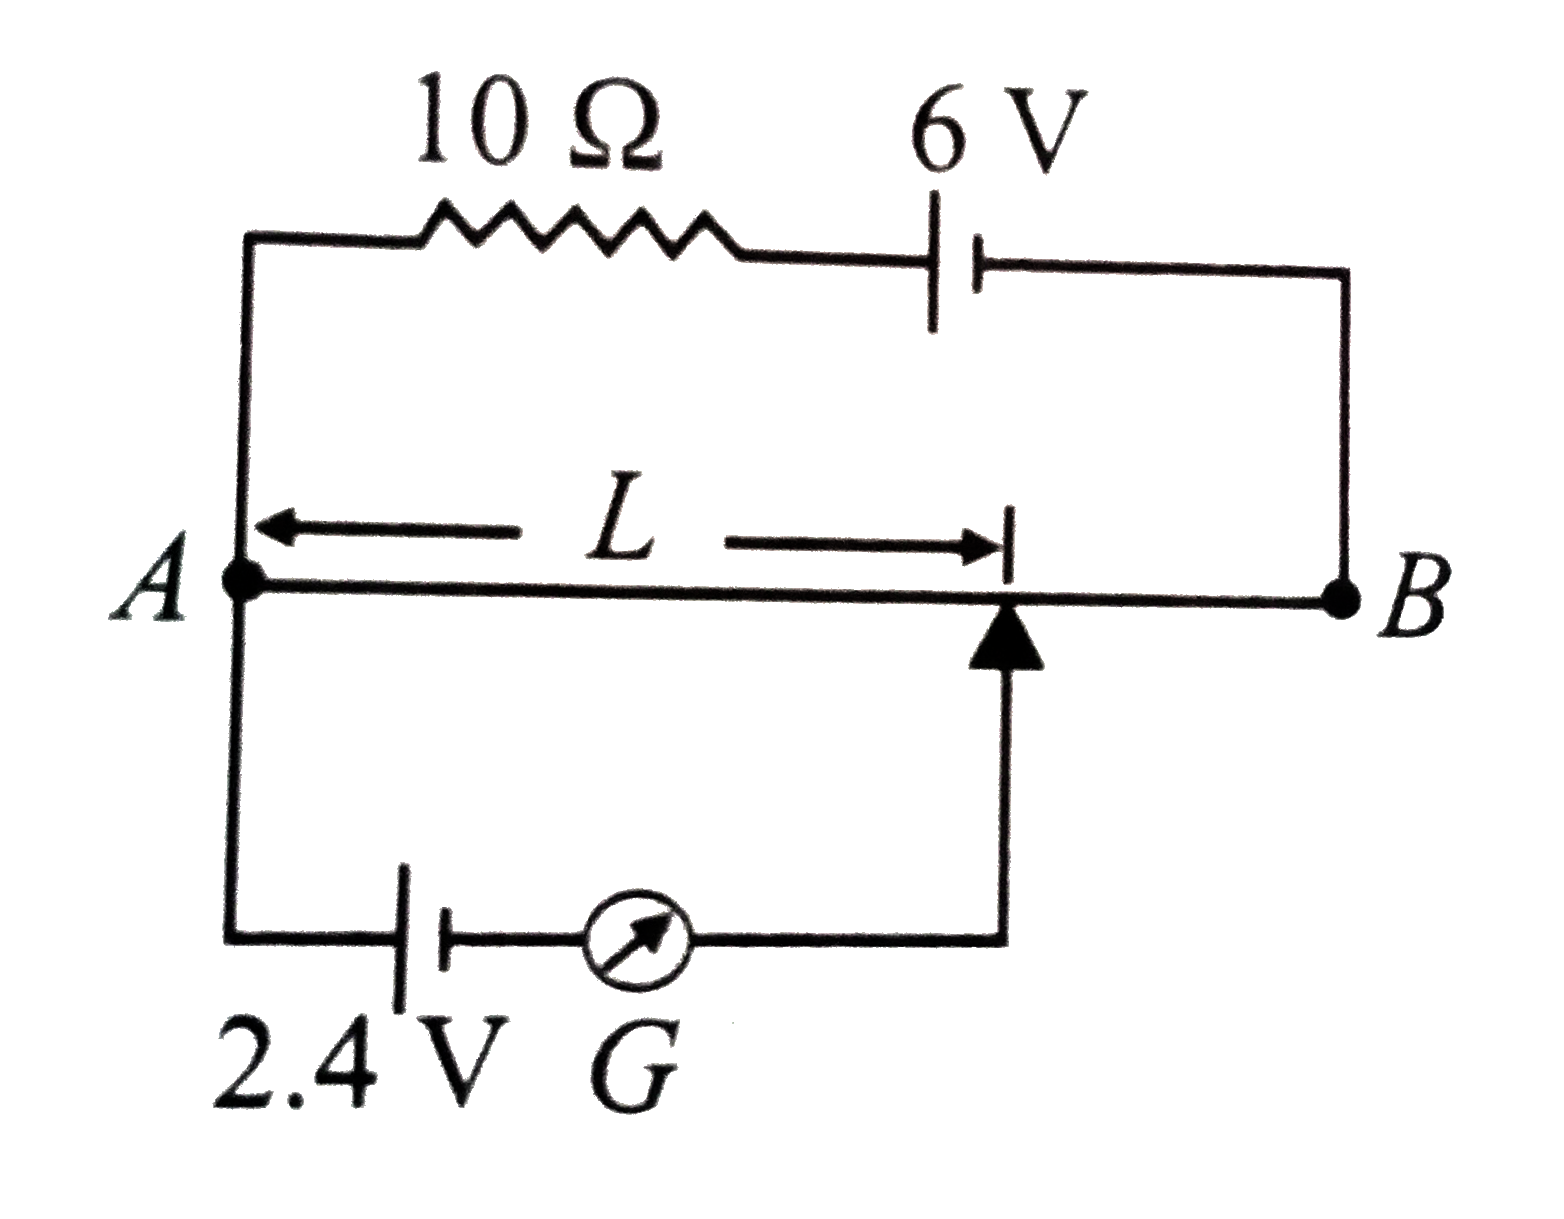 A potentiometer wire of length 200cm has a resistance of 20Omega It is connected in series with a resistance of 10Oemga and an accumulator of emf of 6V having negligible resistance. A source of 2.4V is balanced against a length L of the potentiometer wire. The value of L is